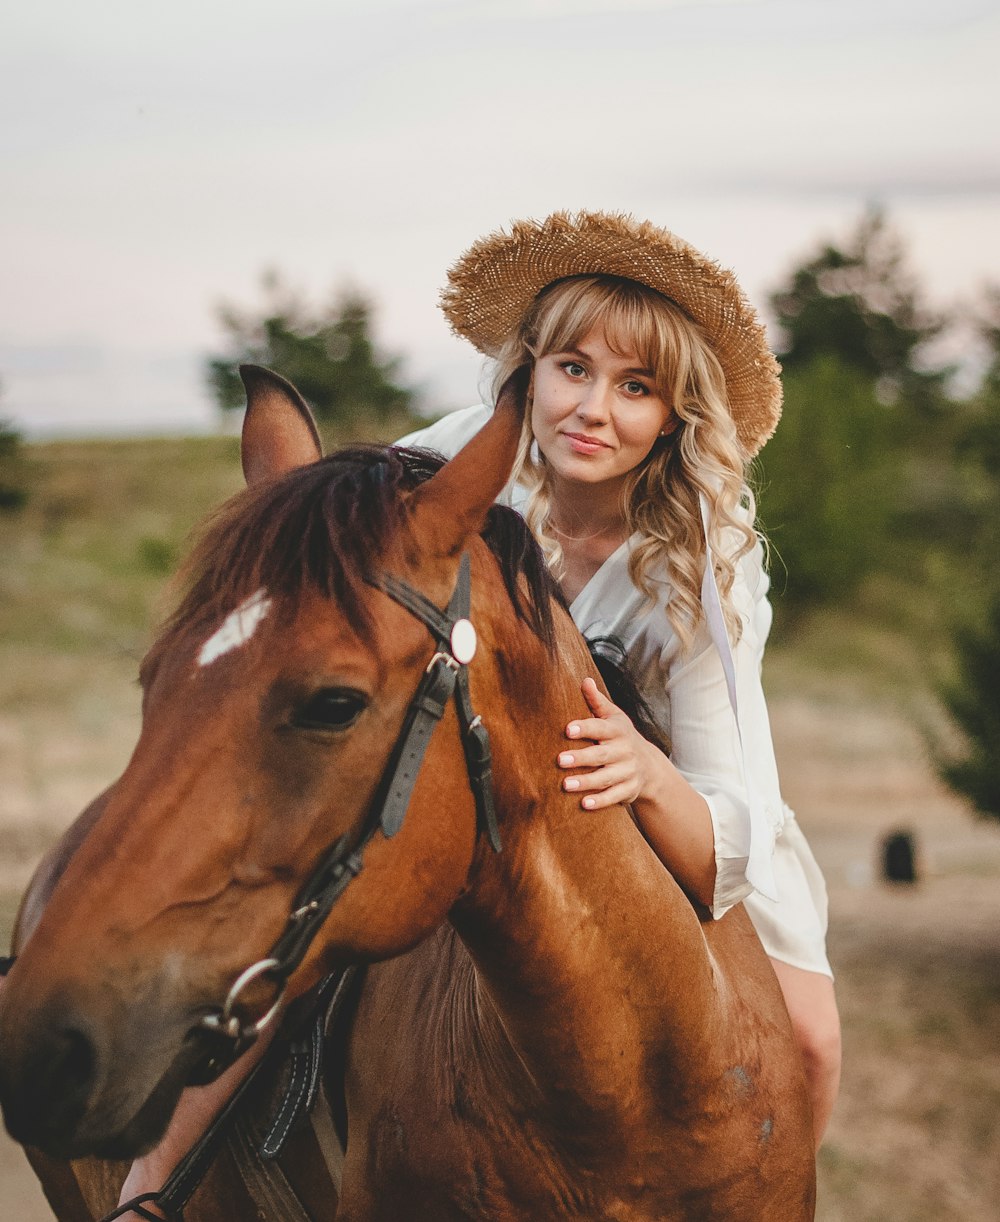 woman in white long sleeve shirt and brown hat standing beside brown horse during daytime